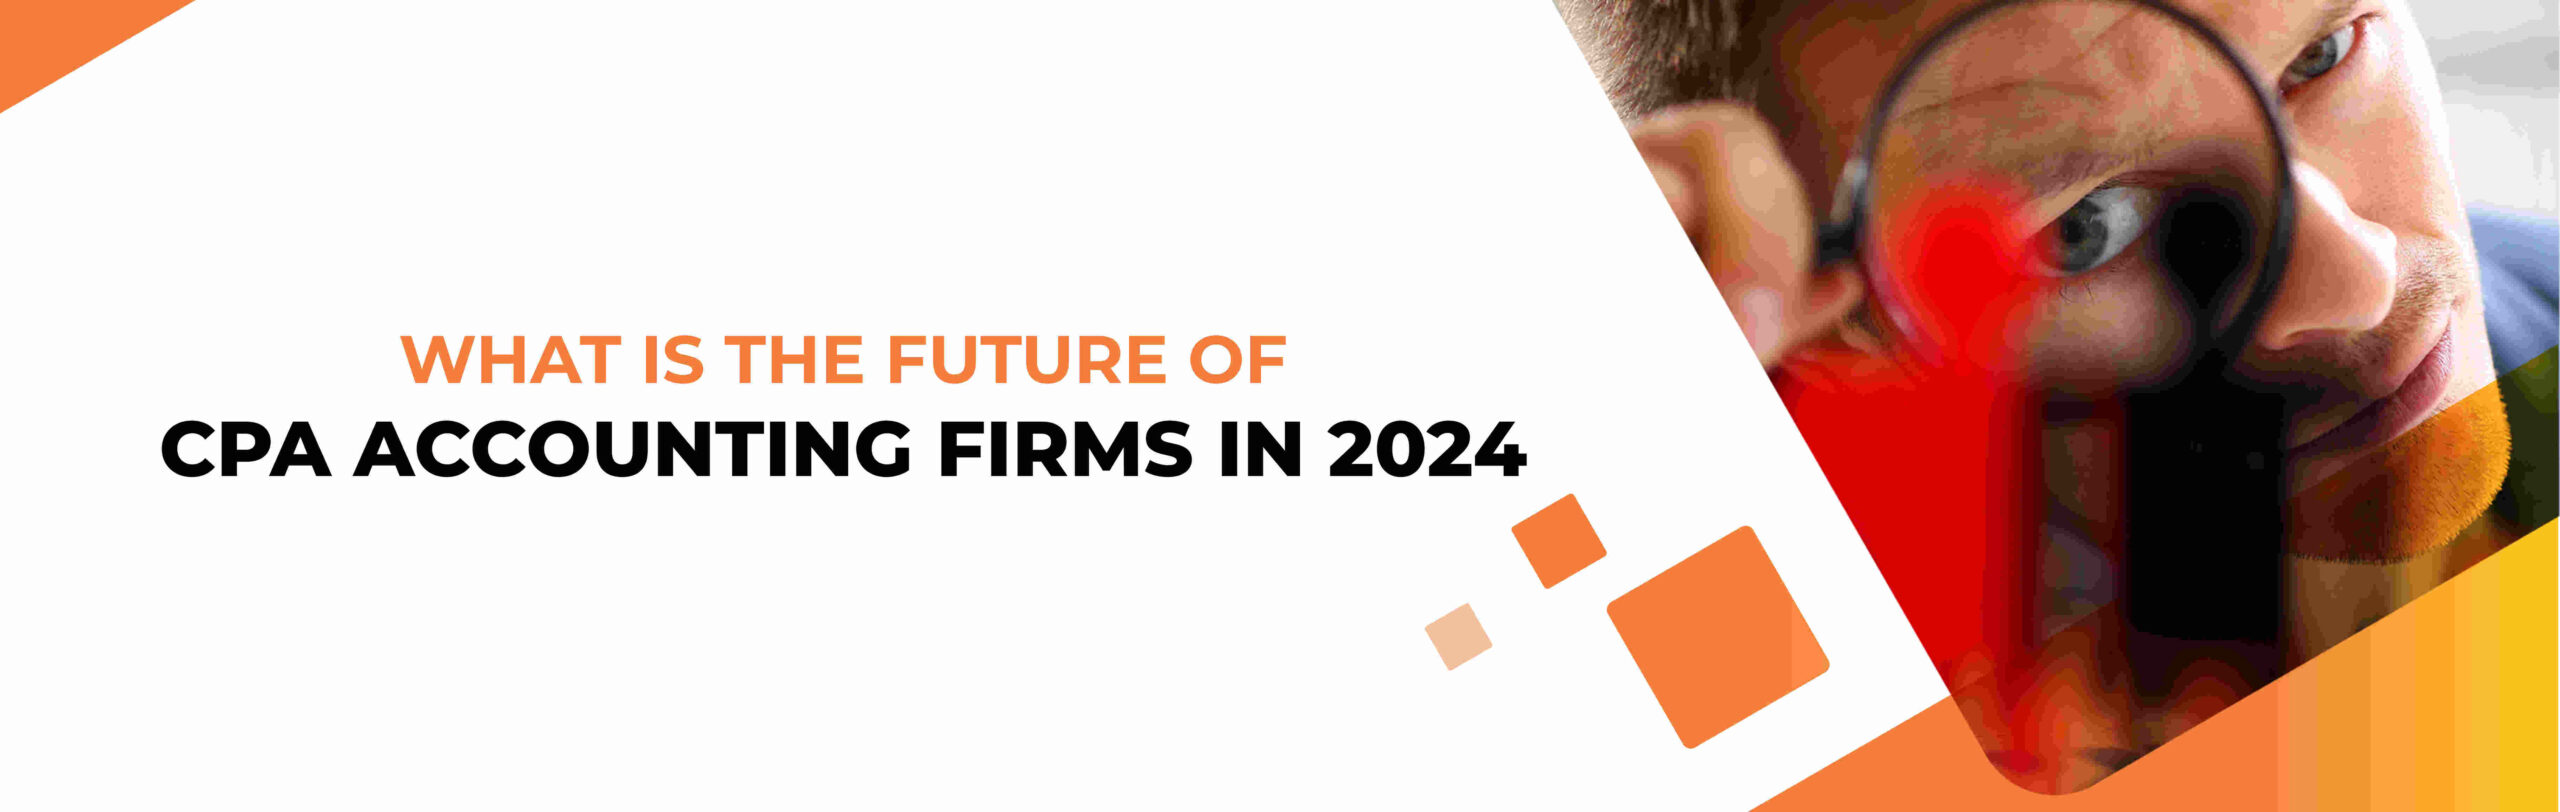 What Is The Future of CPA Accounting Firms in 2024